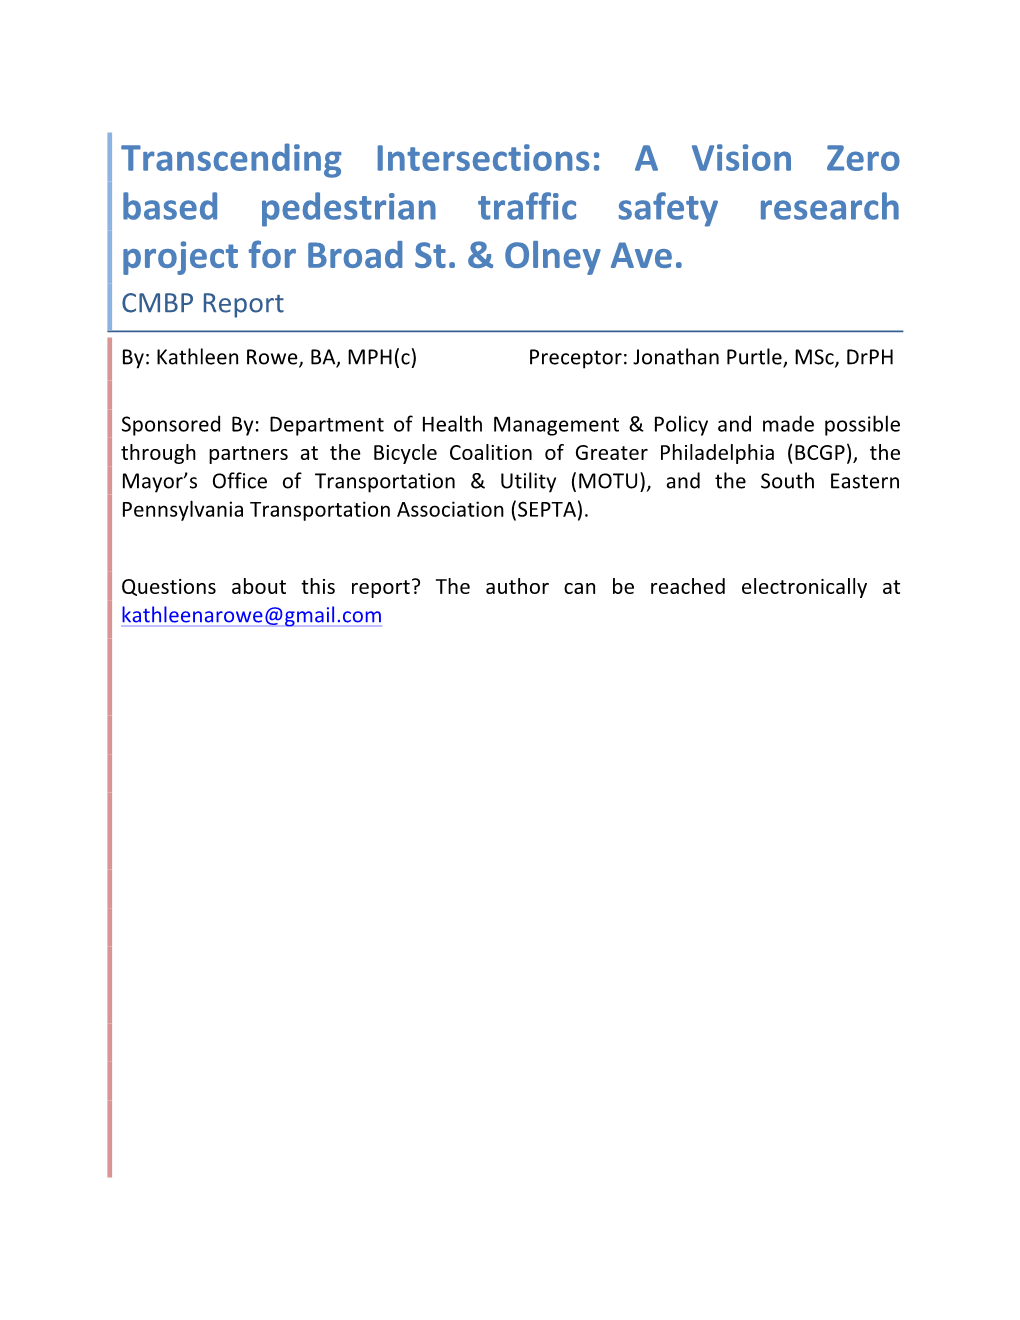 Transcending Intersections: a Vision Zero Based Pedestrian Traffic Safety Research Project for Broad St